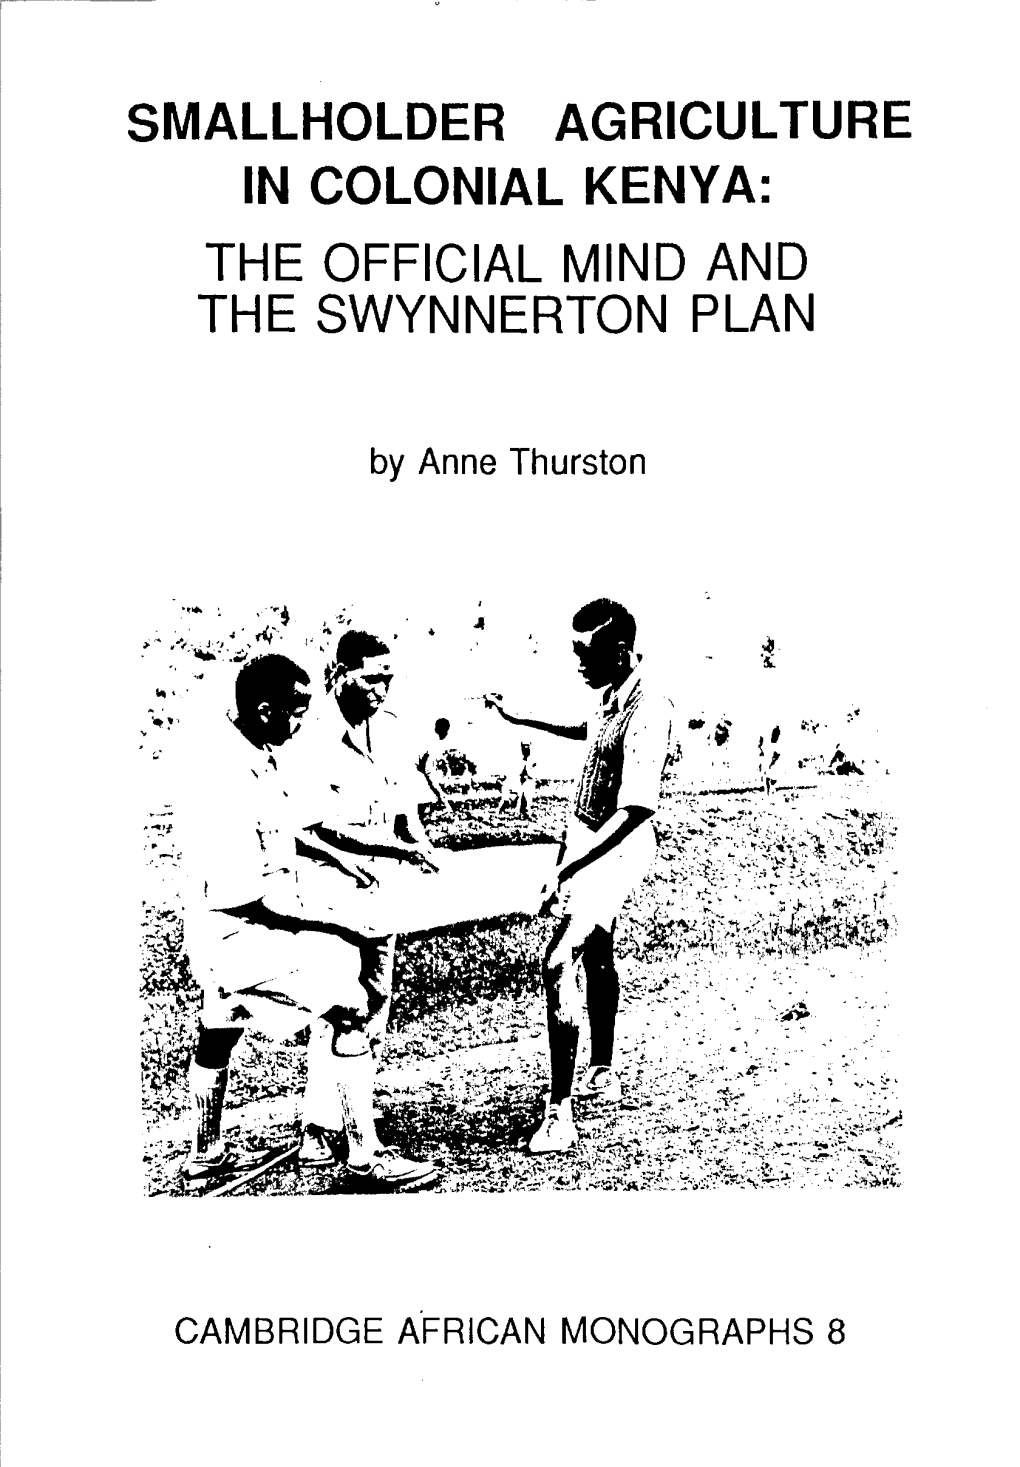 Smallholder Agriculture in Colonial Kenya: the Official Mind and the Swynnerton Plan